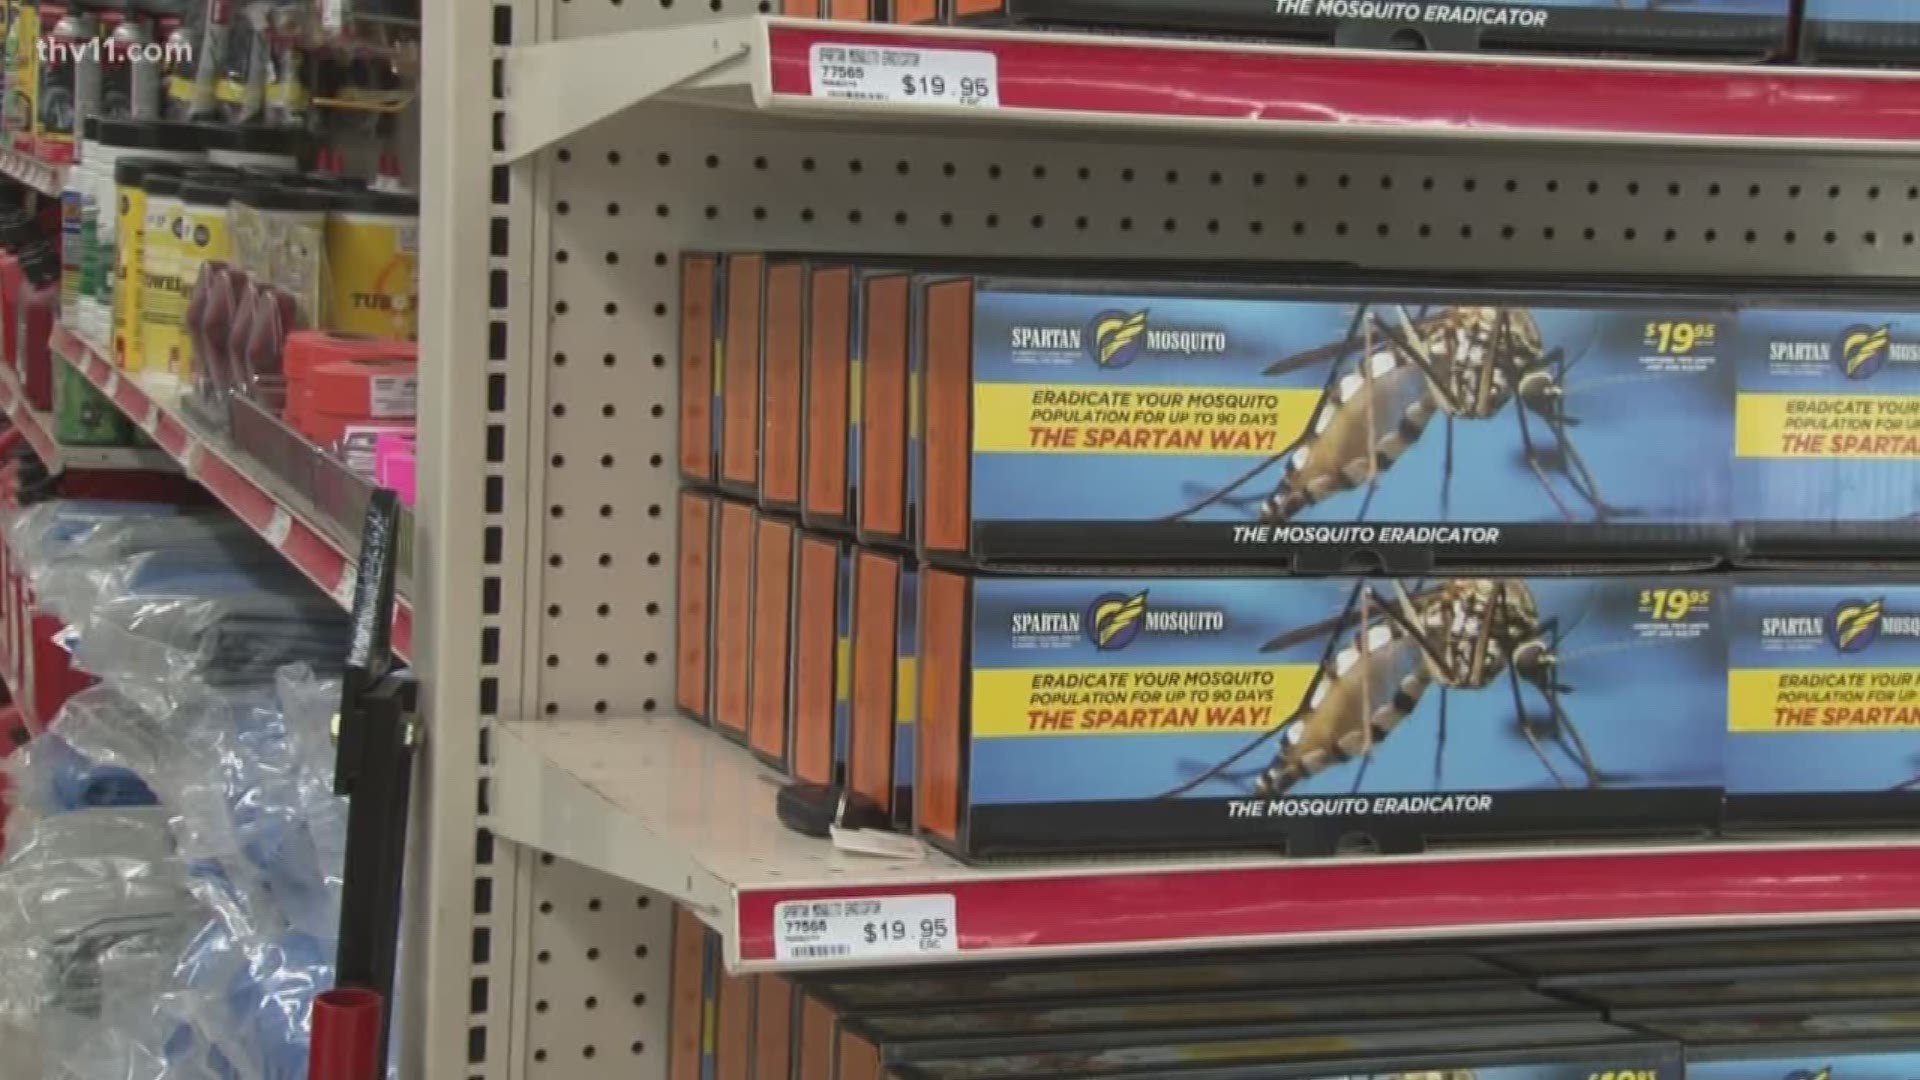 Mosquito product flying off shelves in Arkansas stores